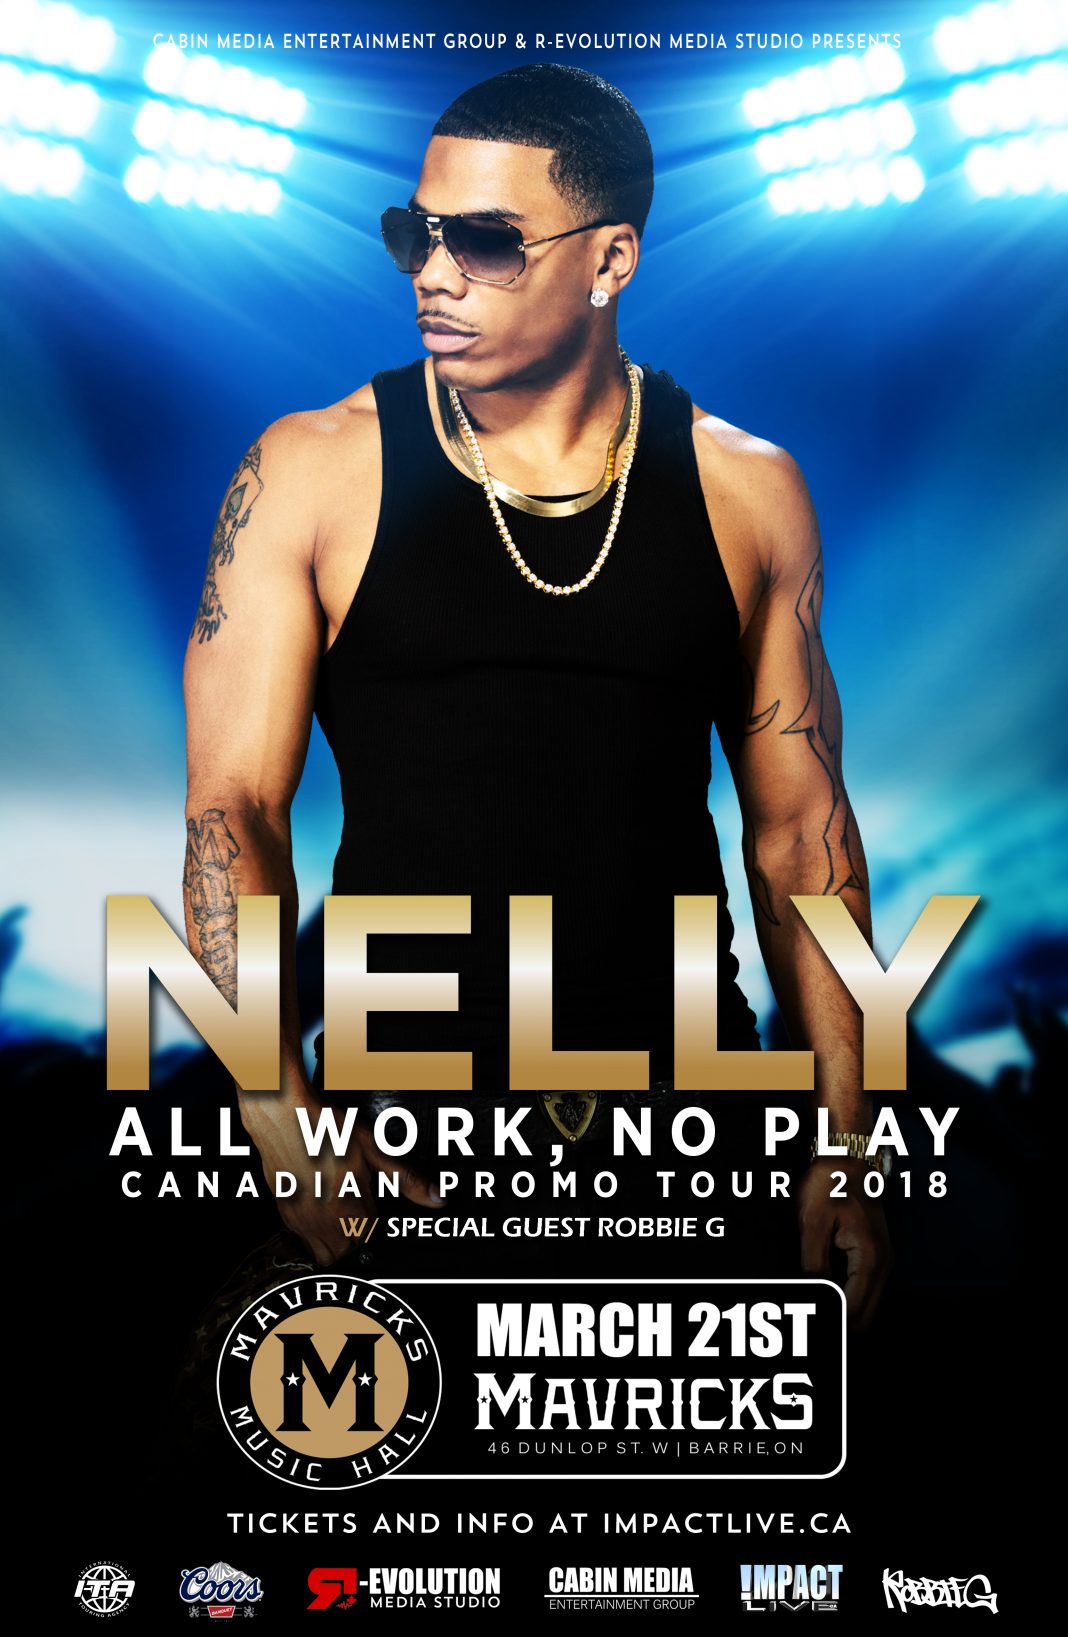 who does nelly tour with